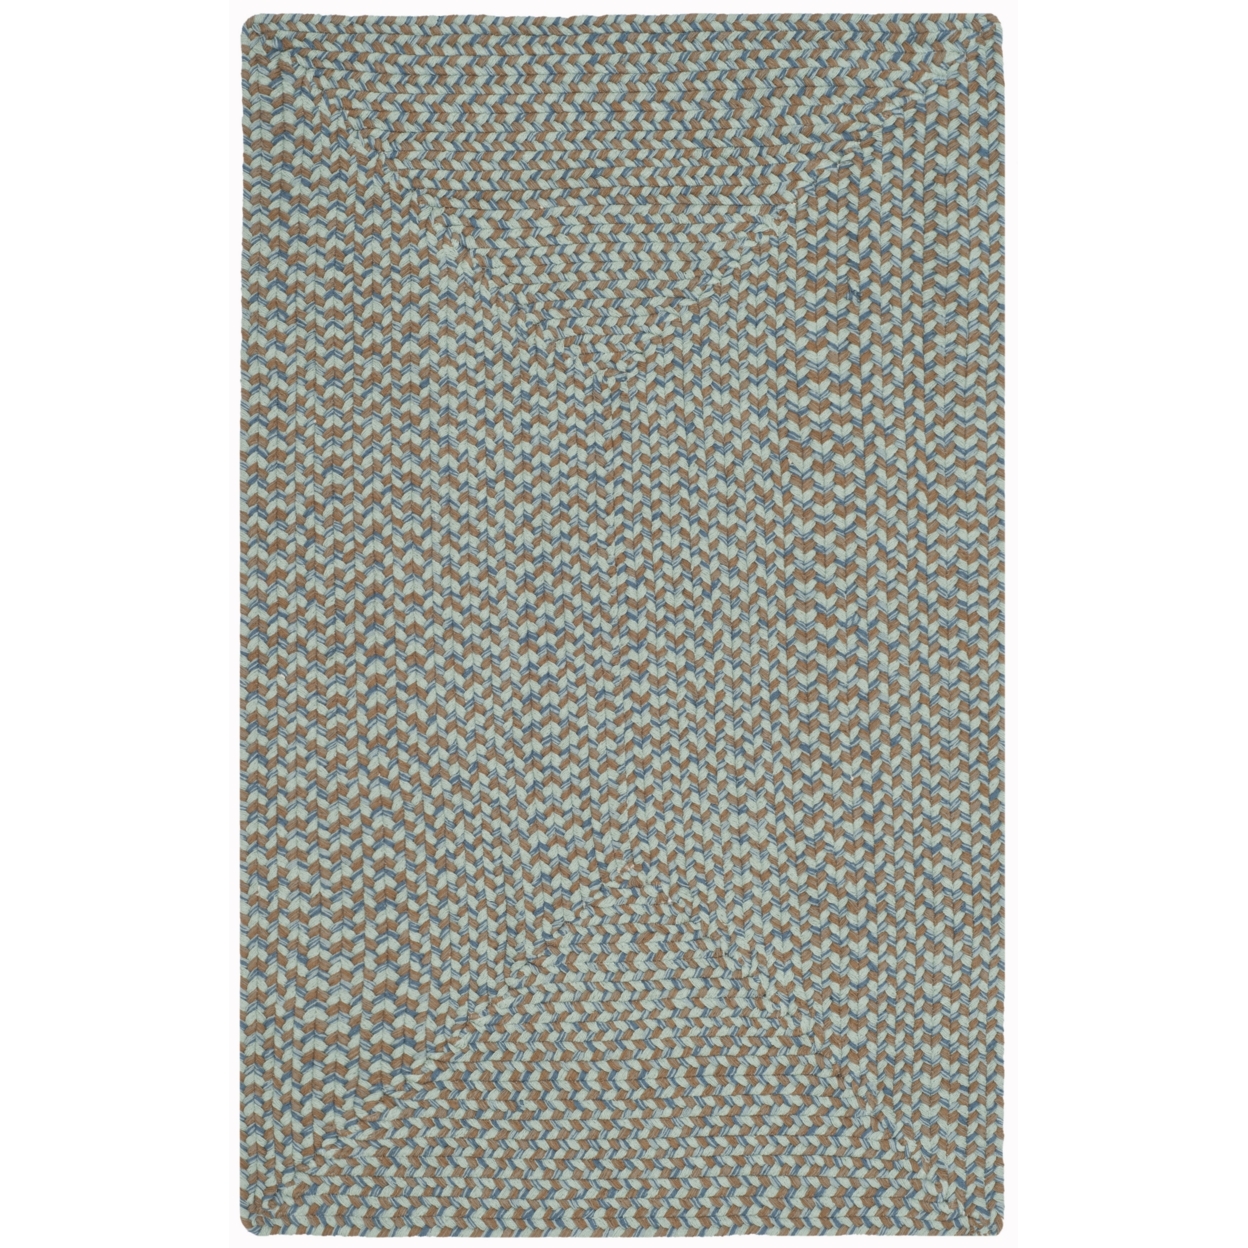 SAFAVIEH Braided Collection BRD170A Handwoven Multi Rug - 9' X 12'